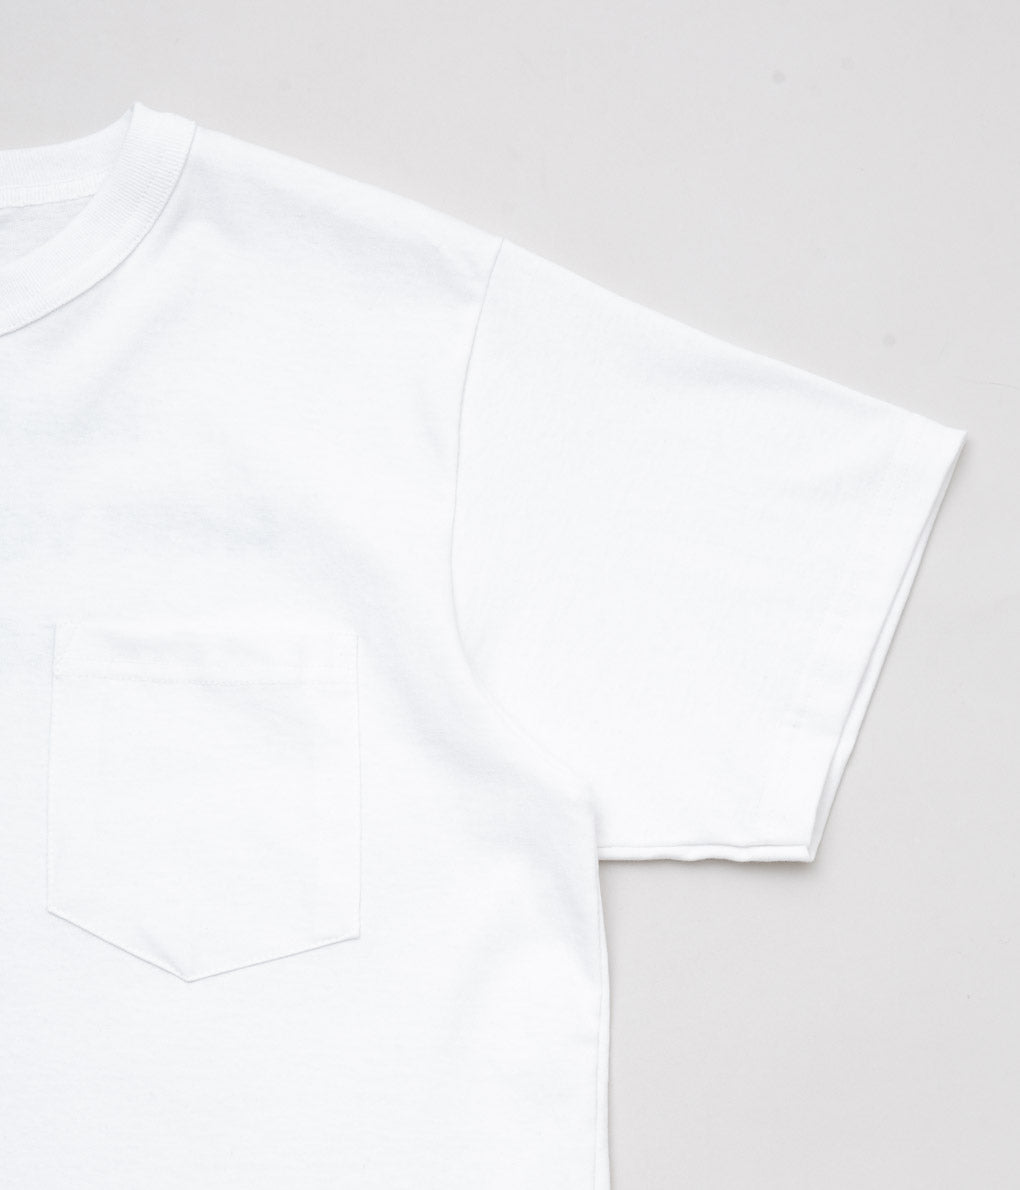 RANDY'S GARMENTS "MADE IN NYC TEE"(WHITE)